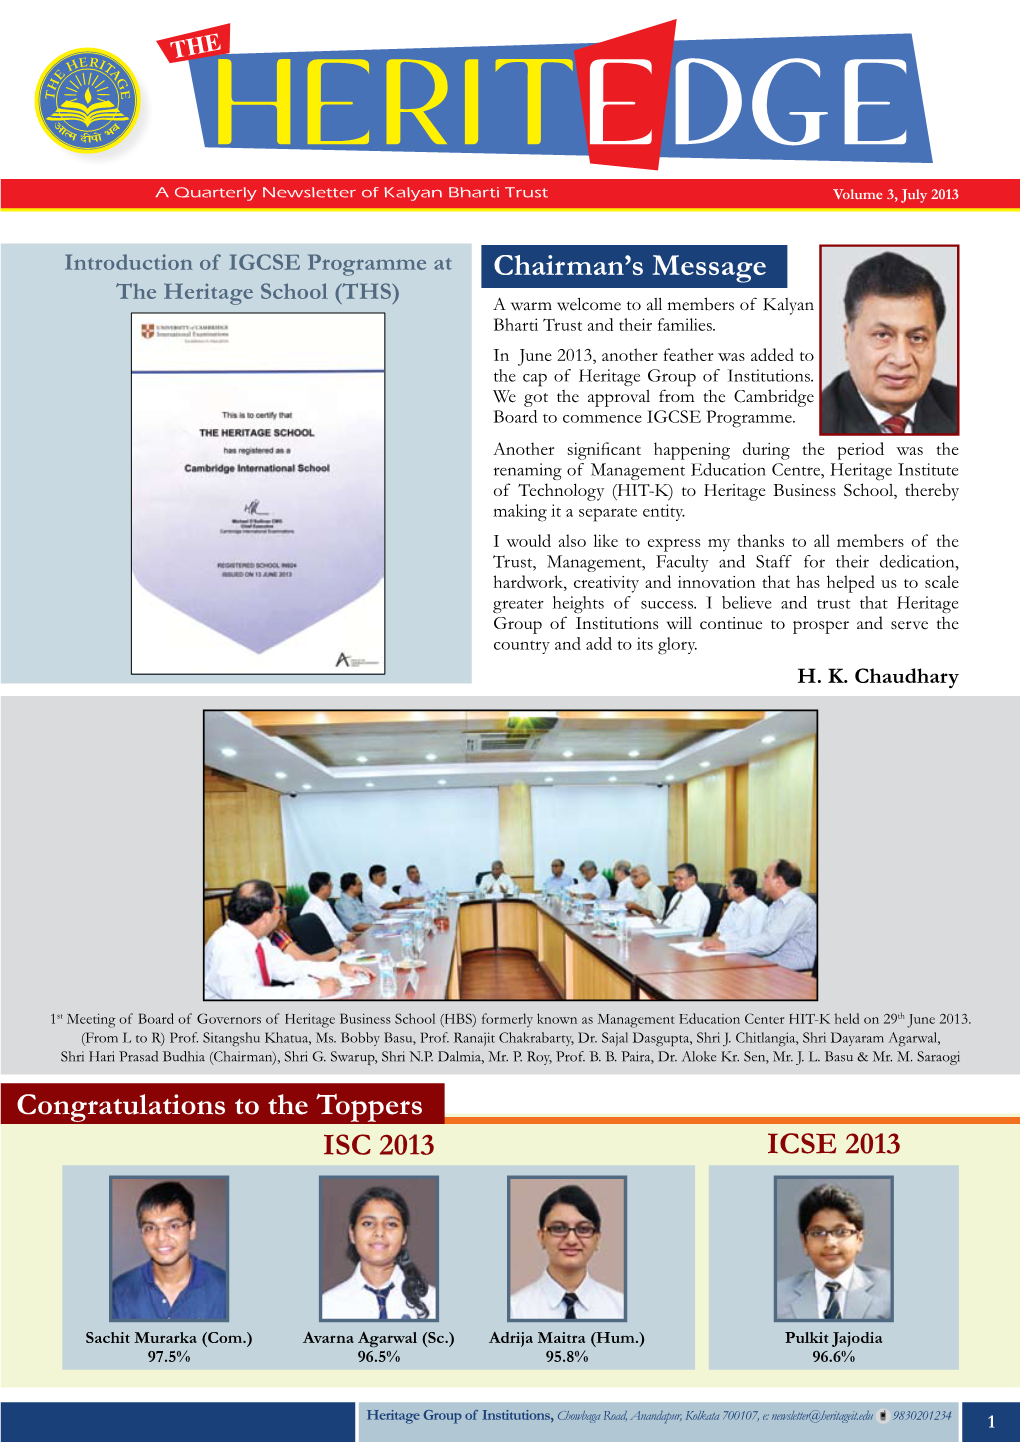 Chairman's Message ICSE 2013 ISC 2013 Congratulations to the Toppers